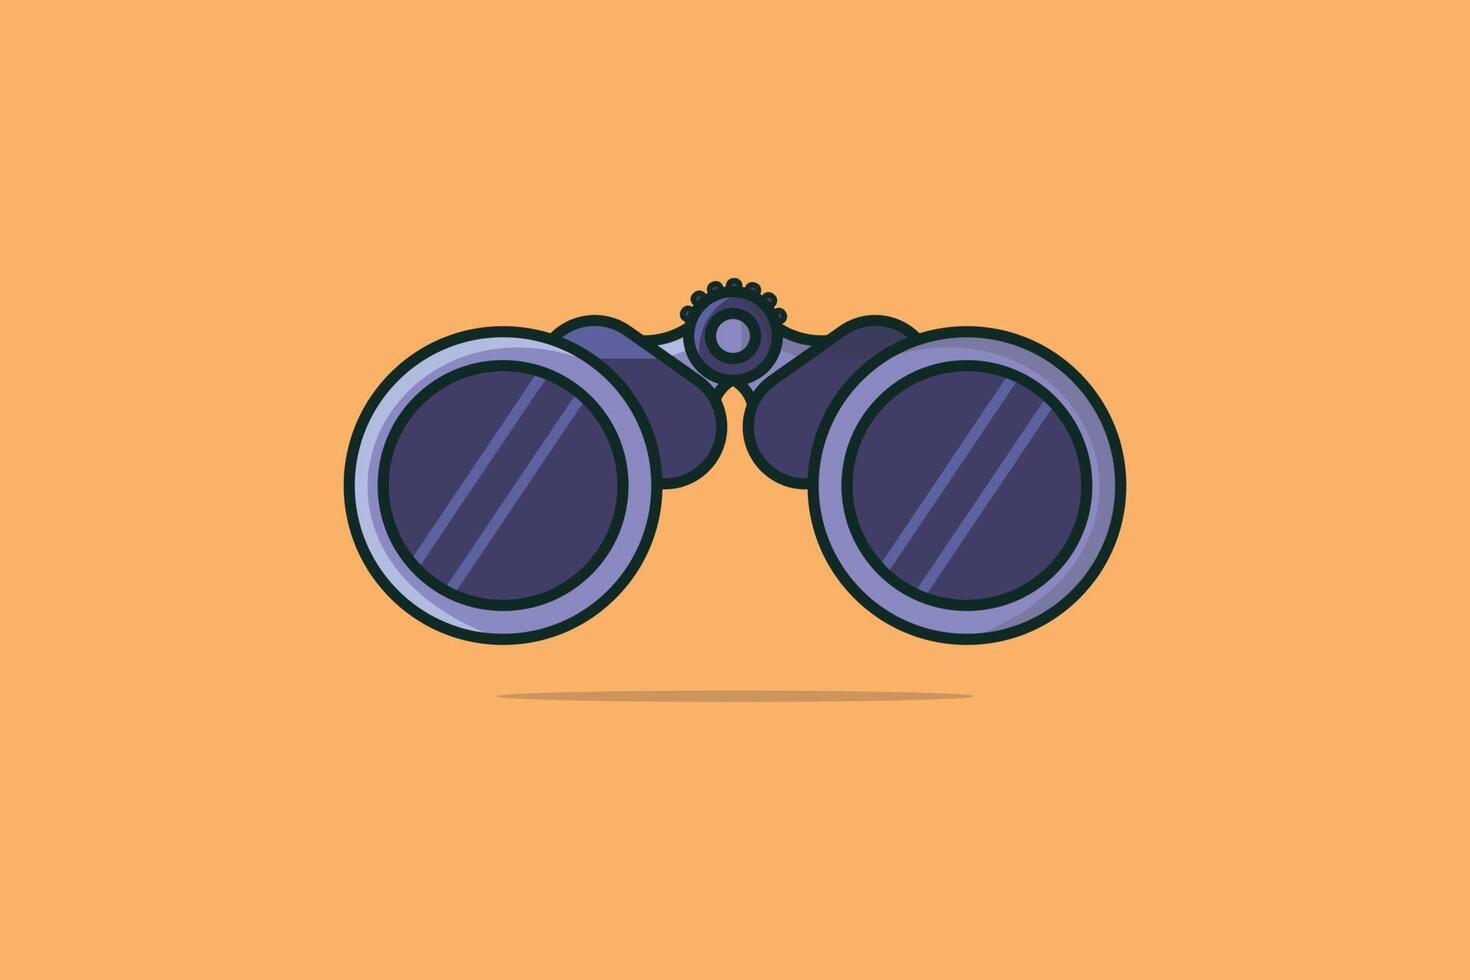 Binoculars Optical Instrument vector illustration. Binocular explorer object icon concept. Binoculars with glass lenses for viewing distant object vector design with shadow on light orange background.